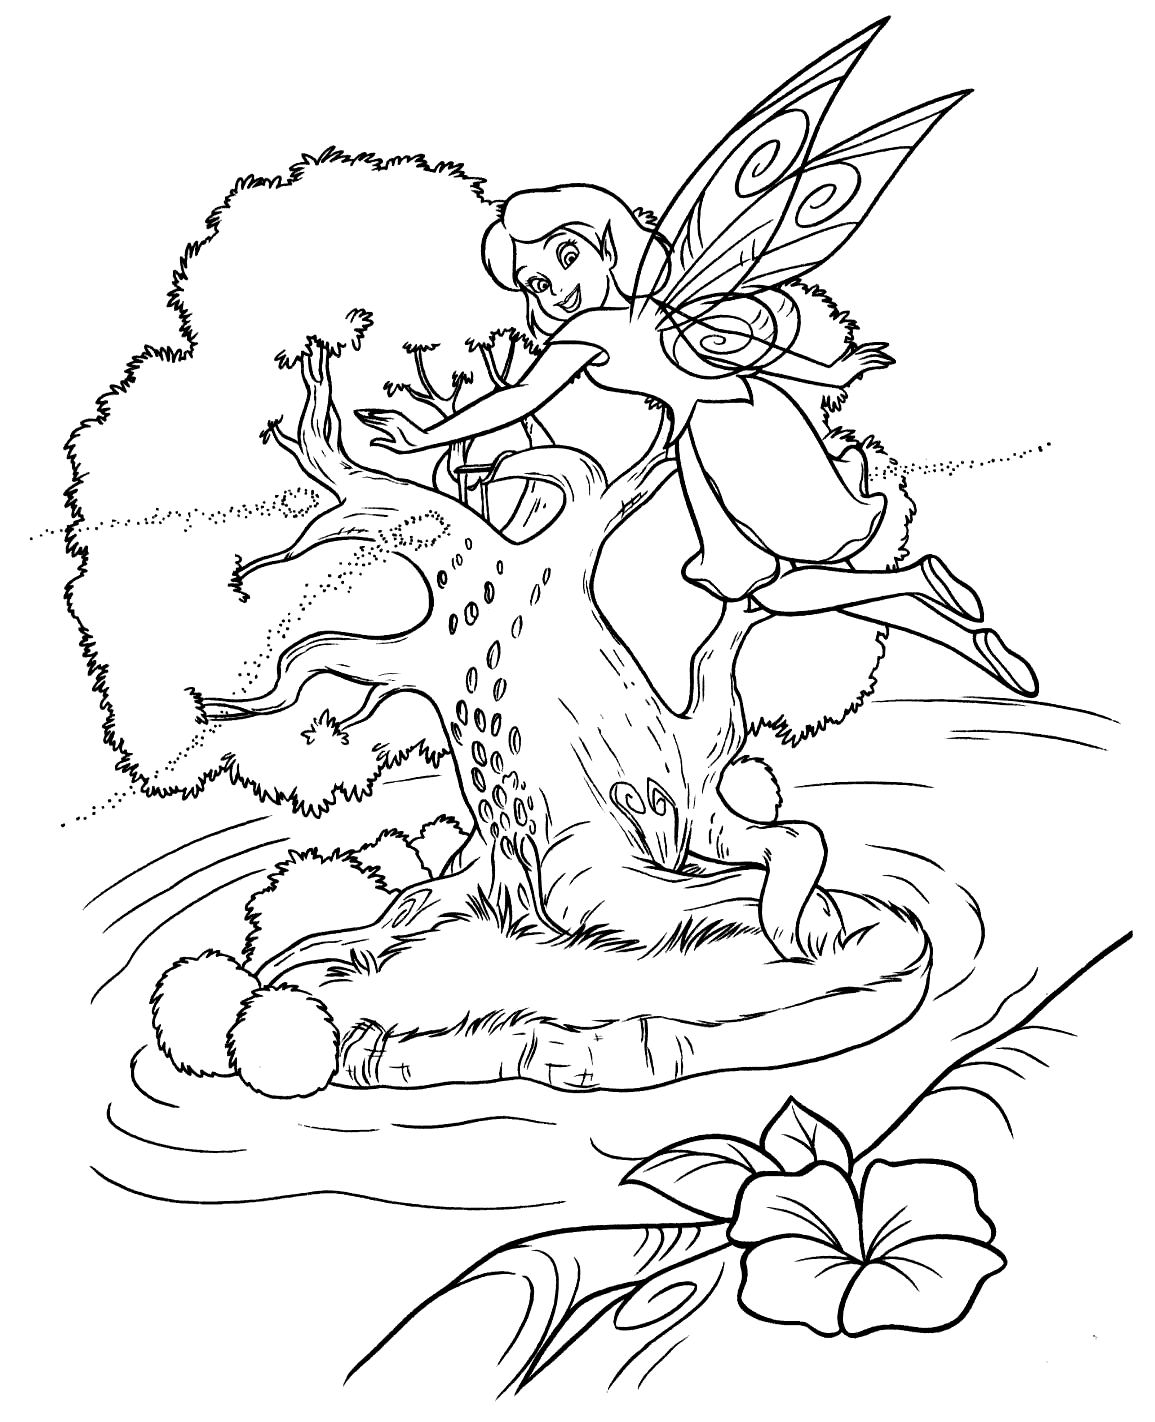 Coloring page - Fairys wings